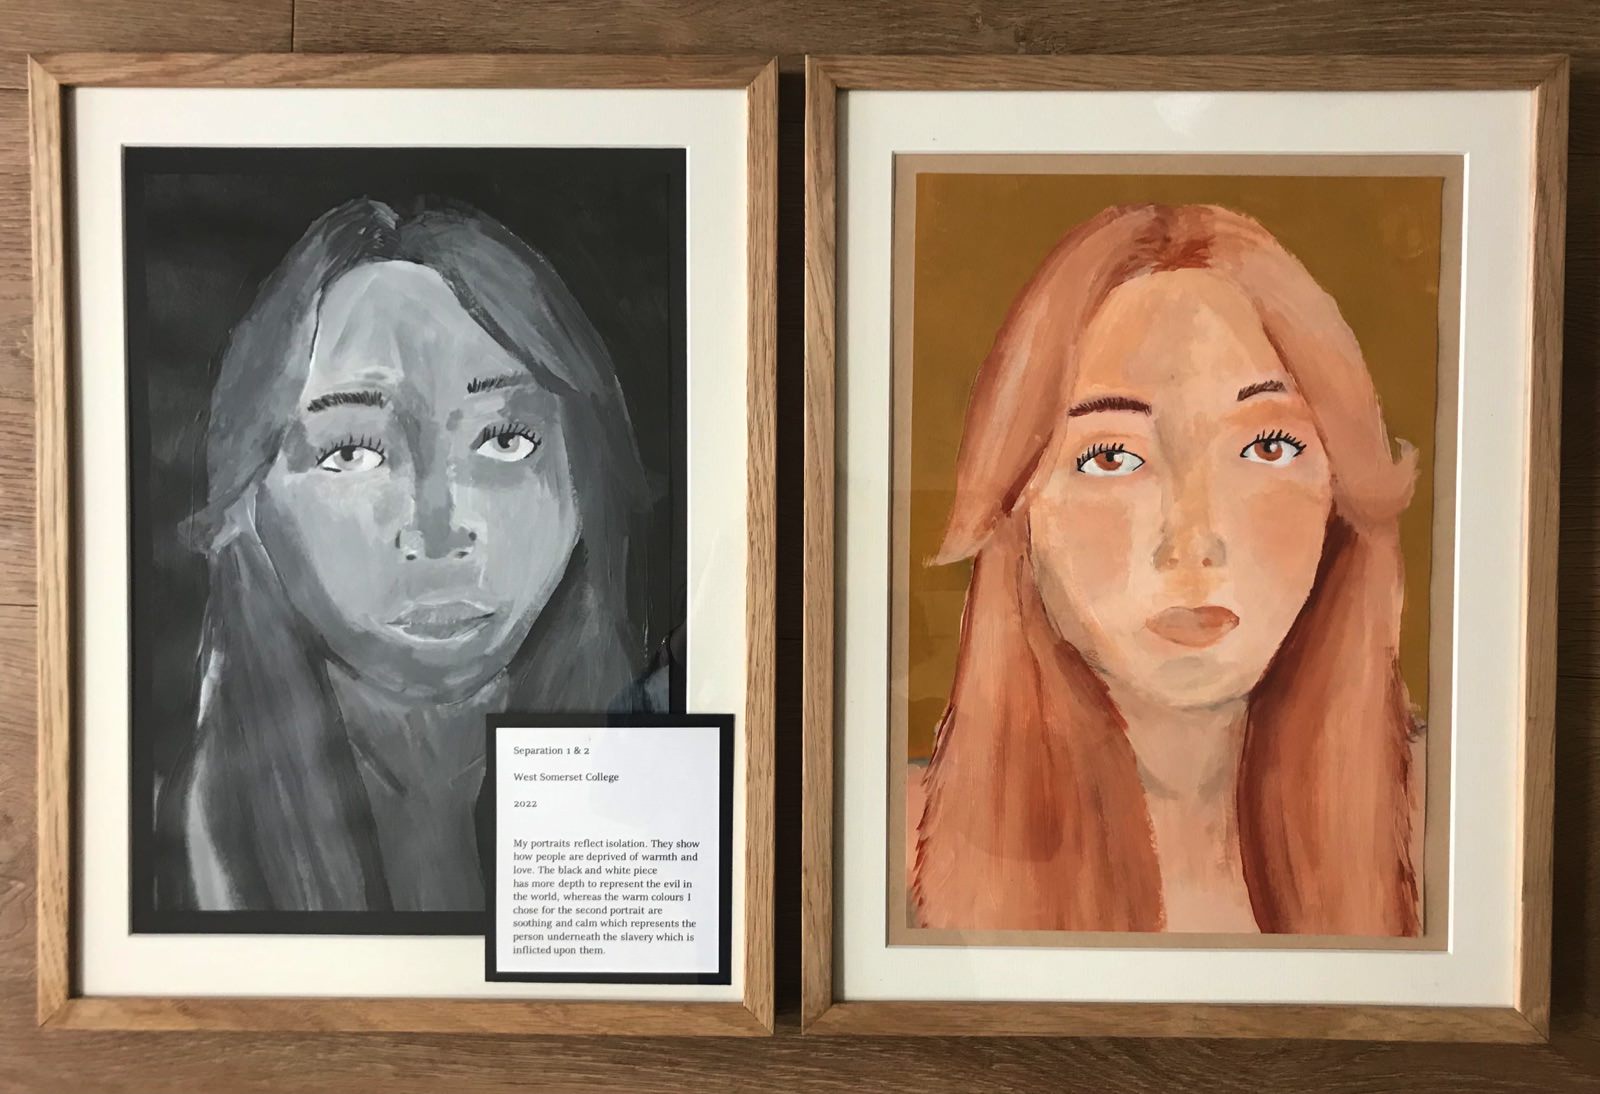 Separation 1 & 2 - by a West Somerset College Art Student